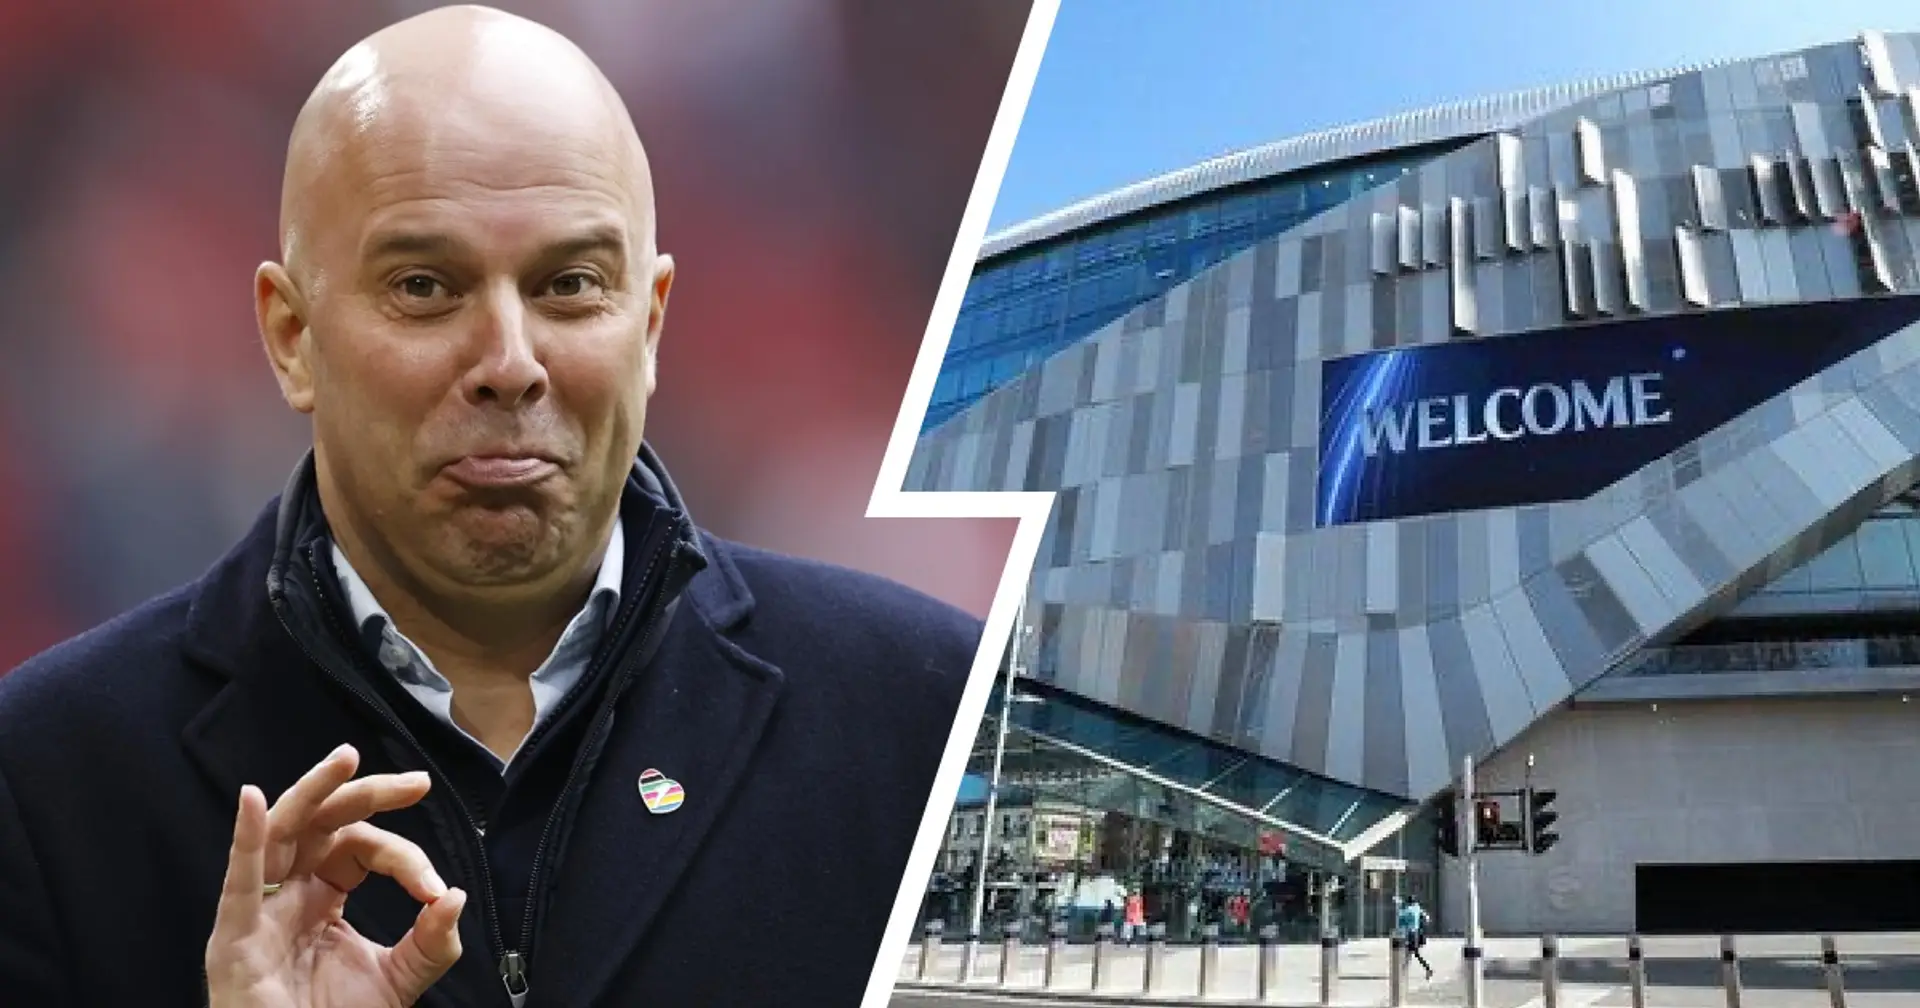 Arne Slot strong candidate to become new Spurs boss - he's beaten Ajax and PSV to Eredivisie league title